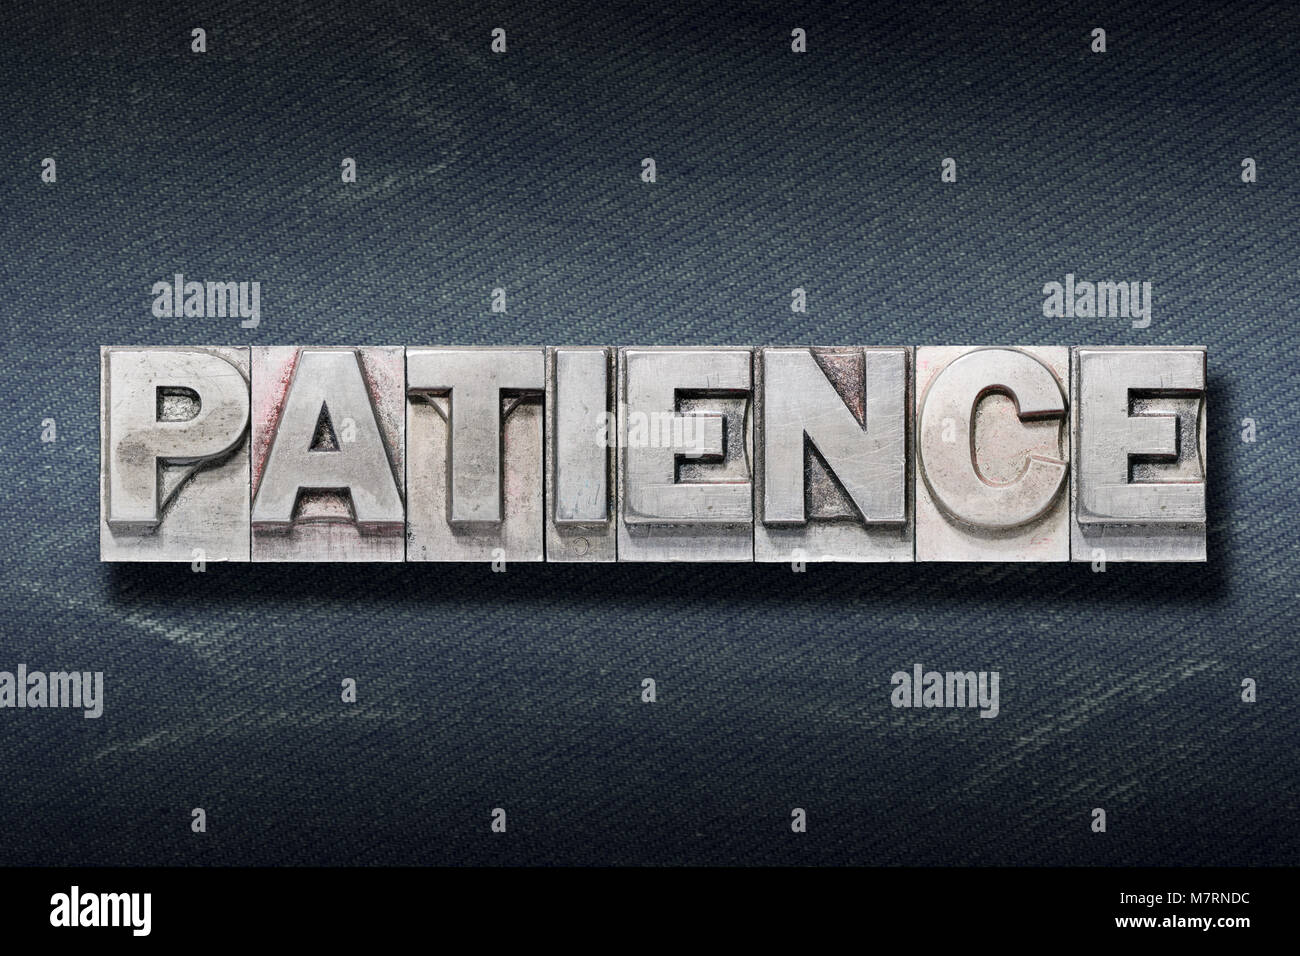 patience word made from metallic letterpress on dark jeans background Stock Photo